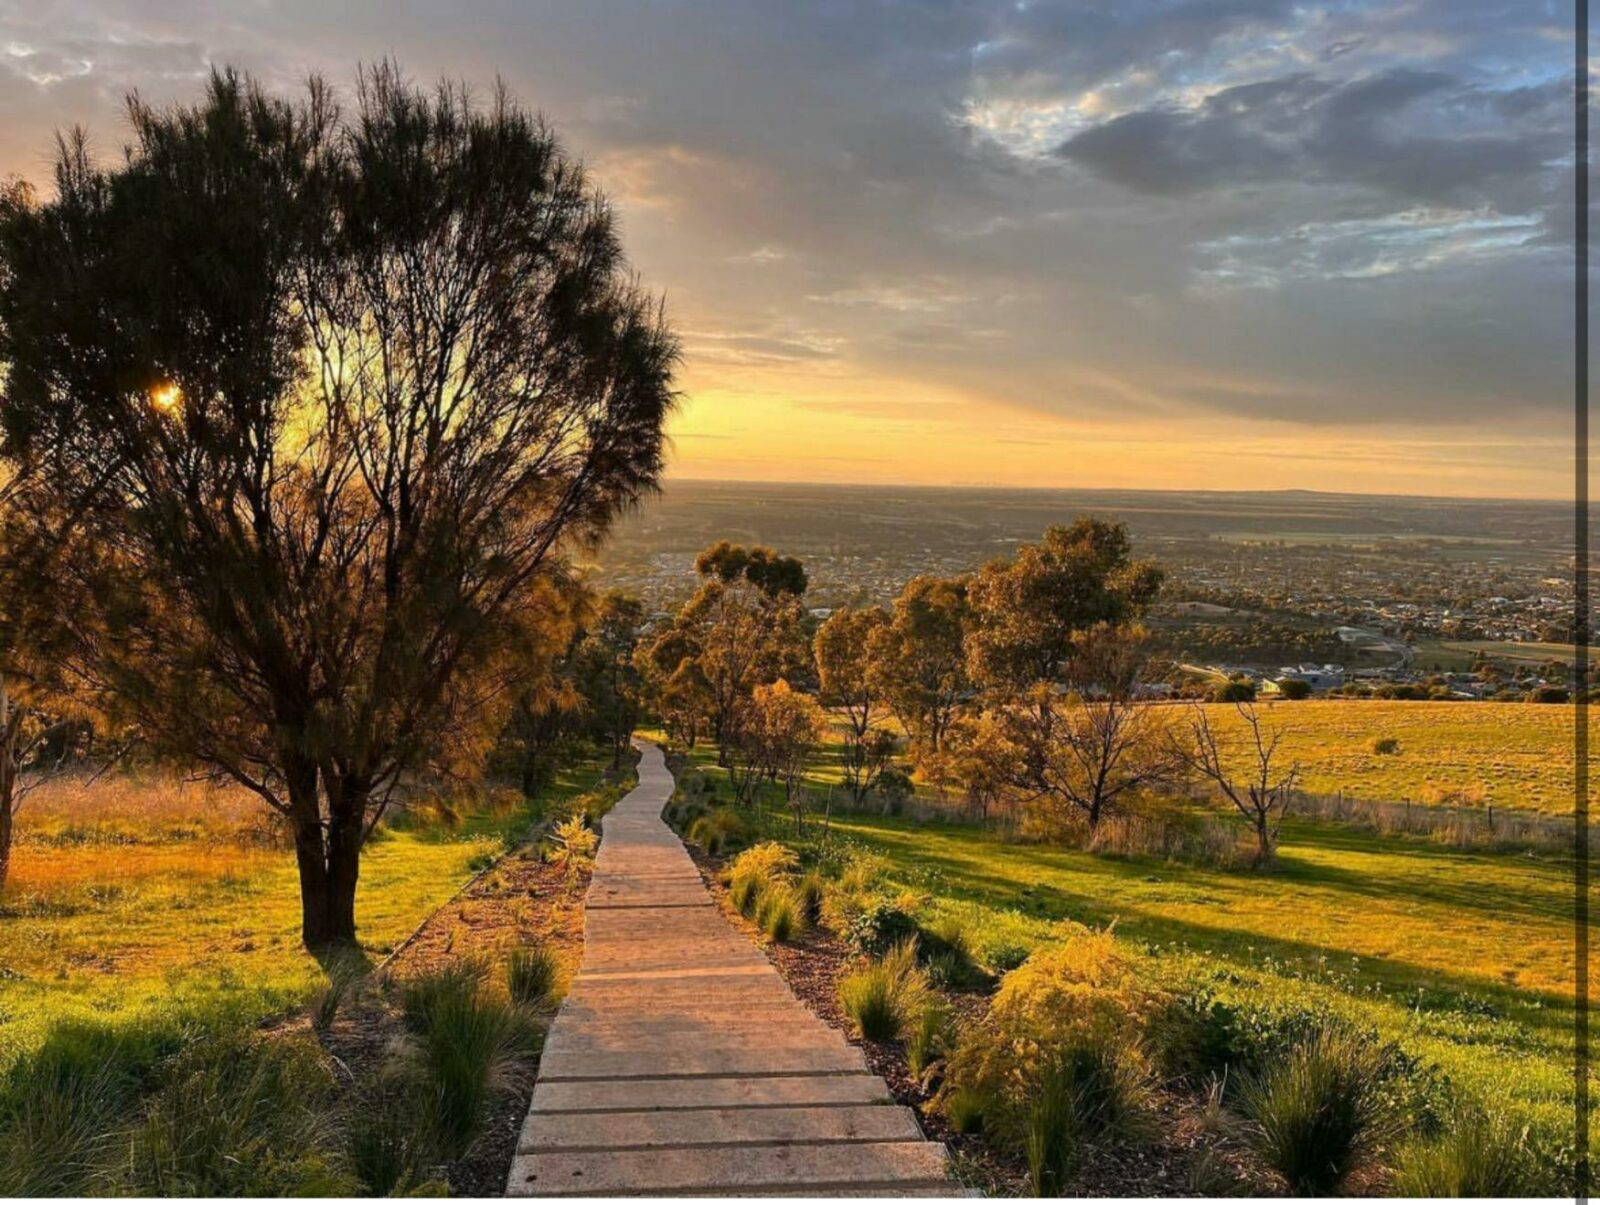 Landscape image of Bald Hill. The steps are visiable and the image is taken at sunrise.